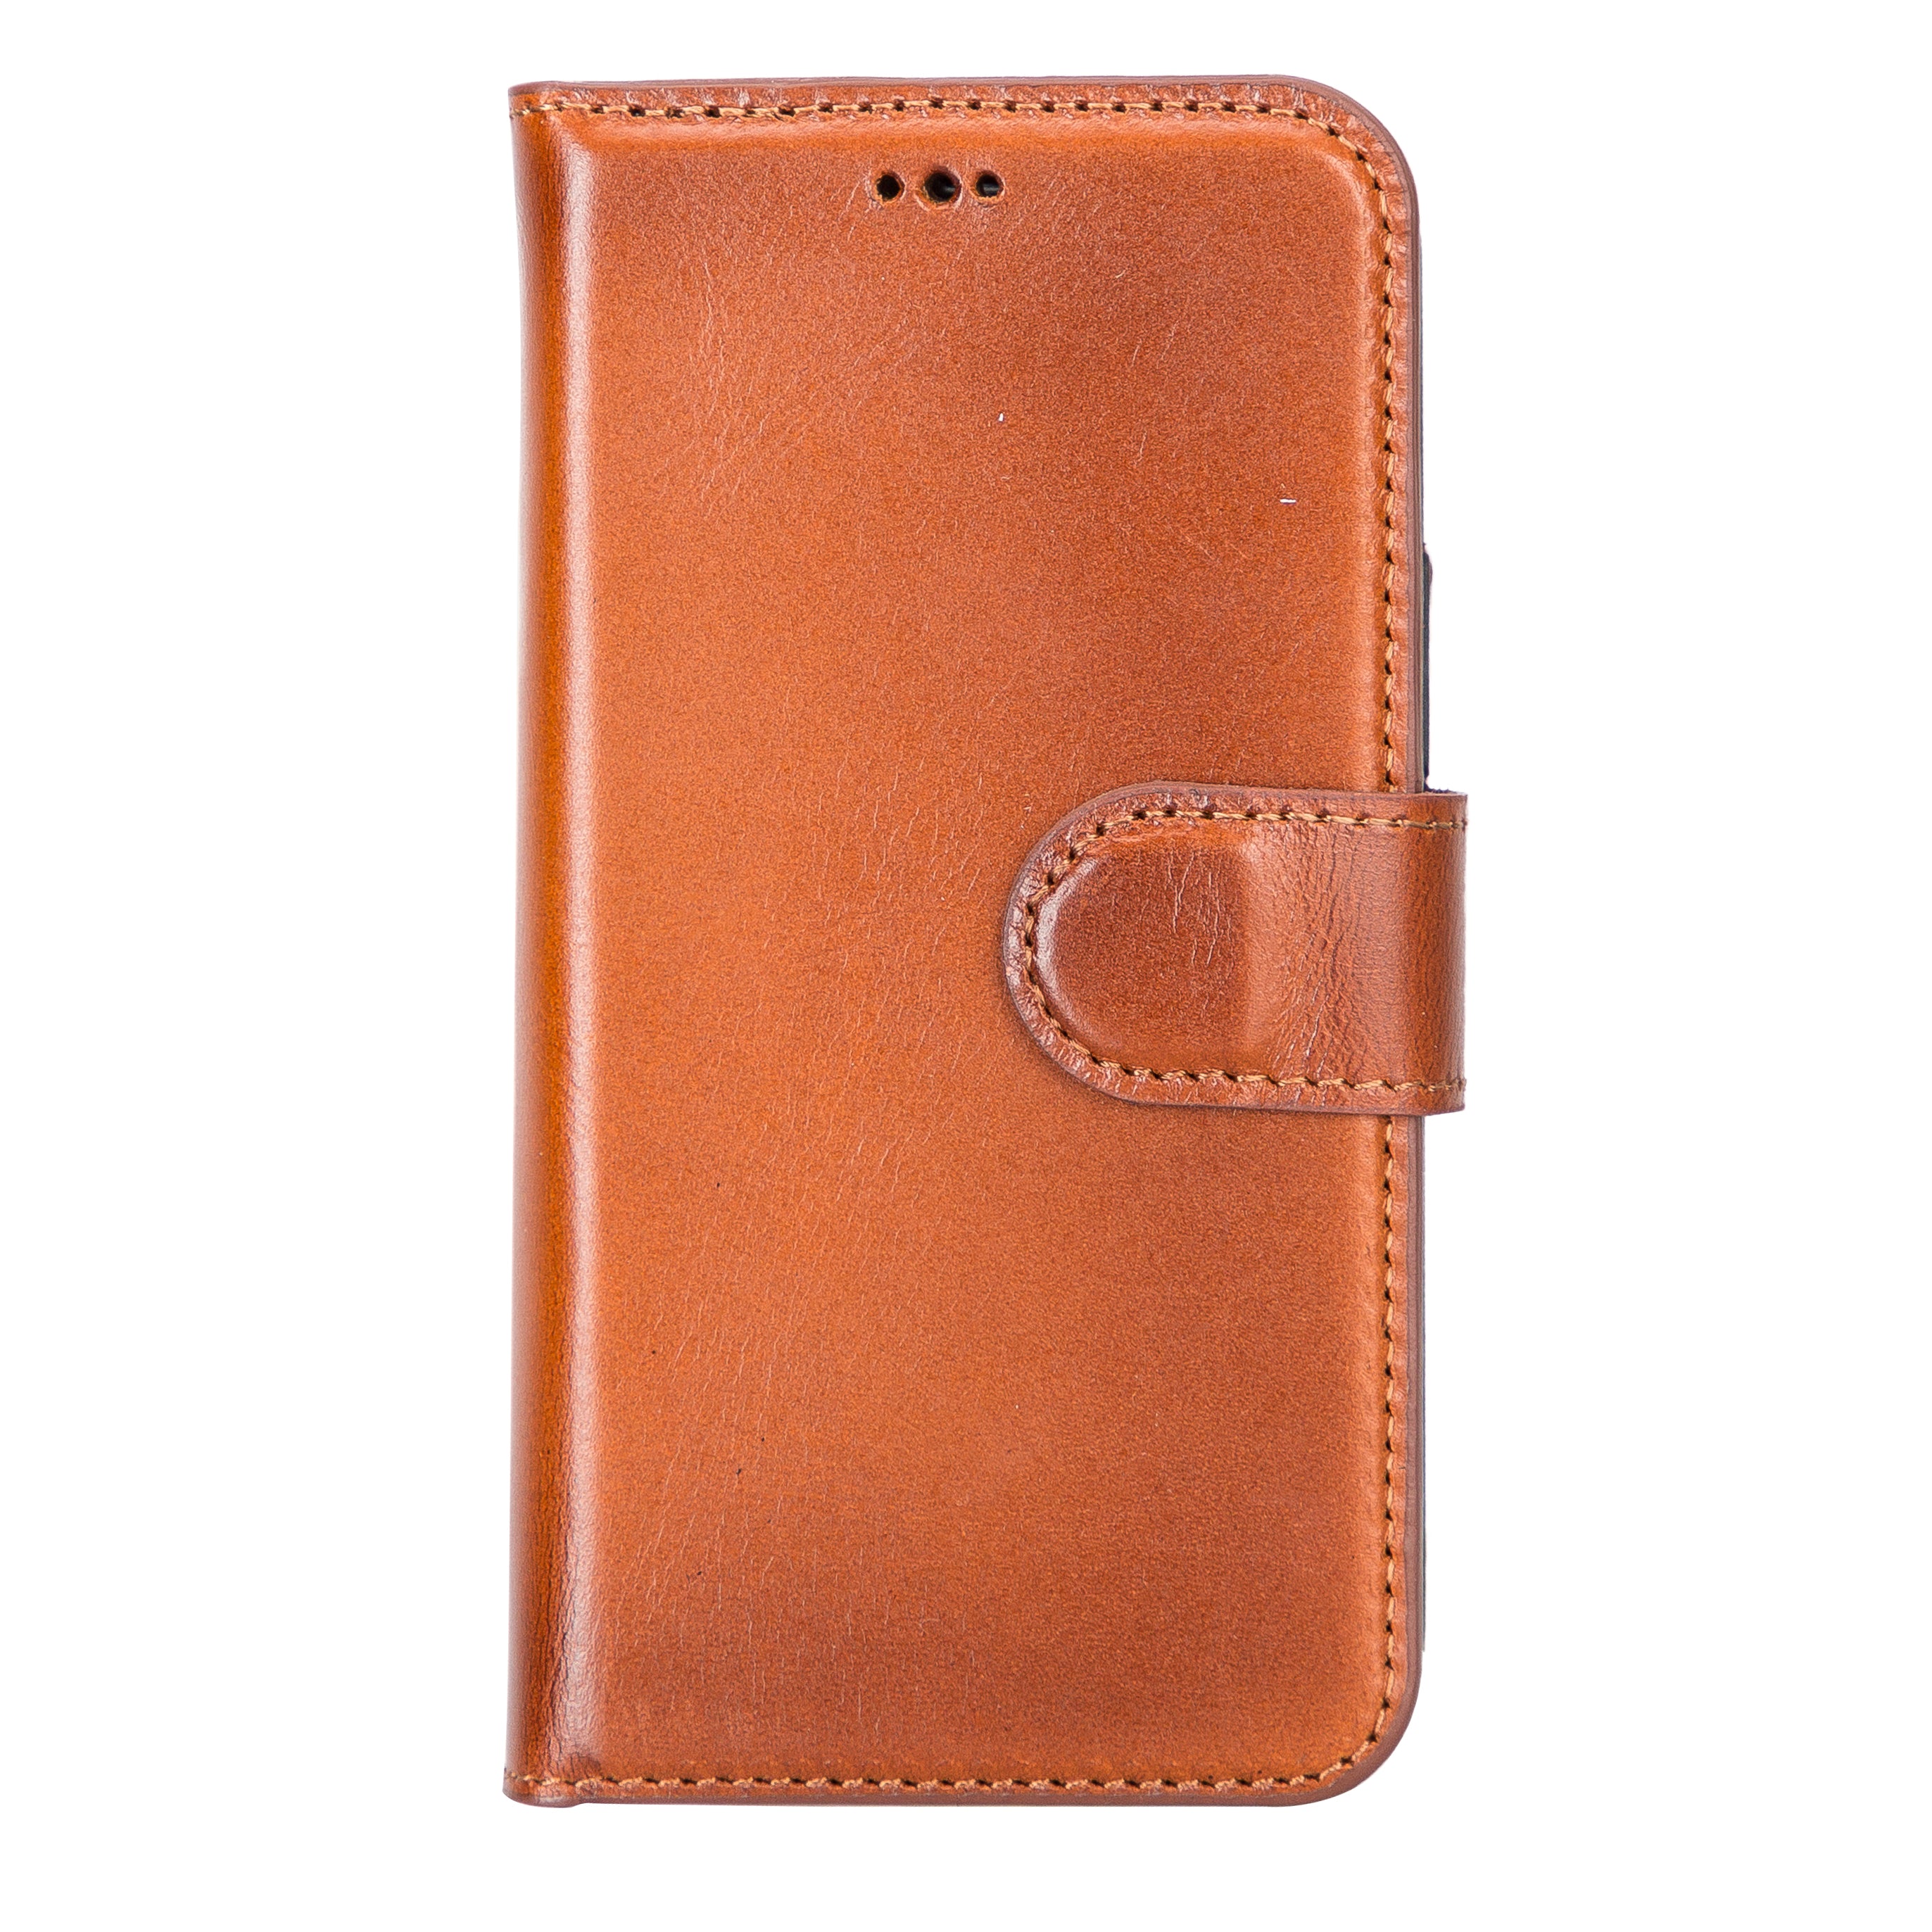 DelfiCase Leather Magnetic Detachable Wallet Case for iPhone 12 Mini (5.4") 25